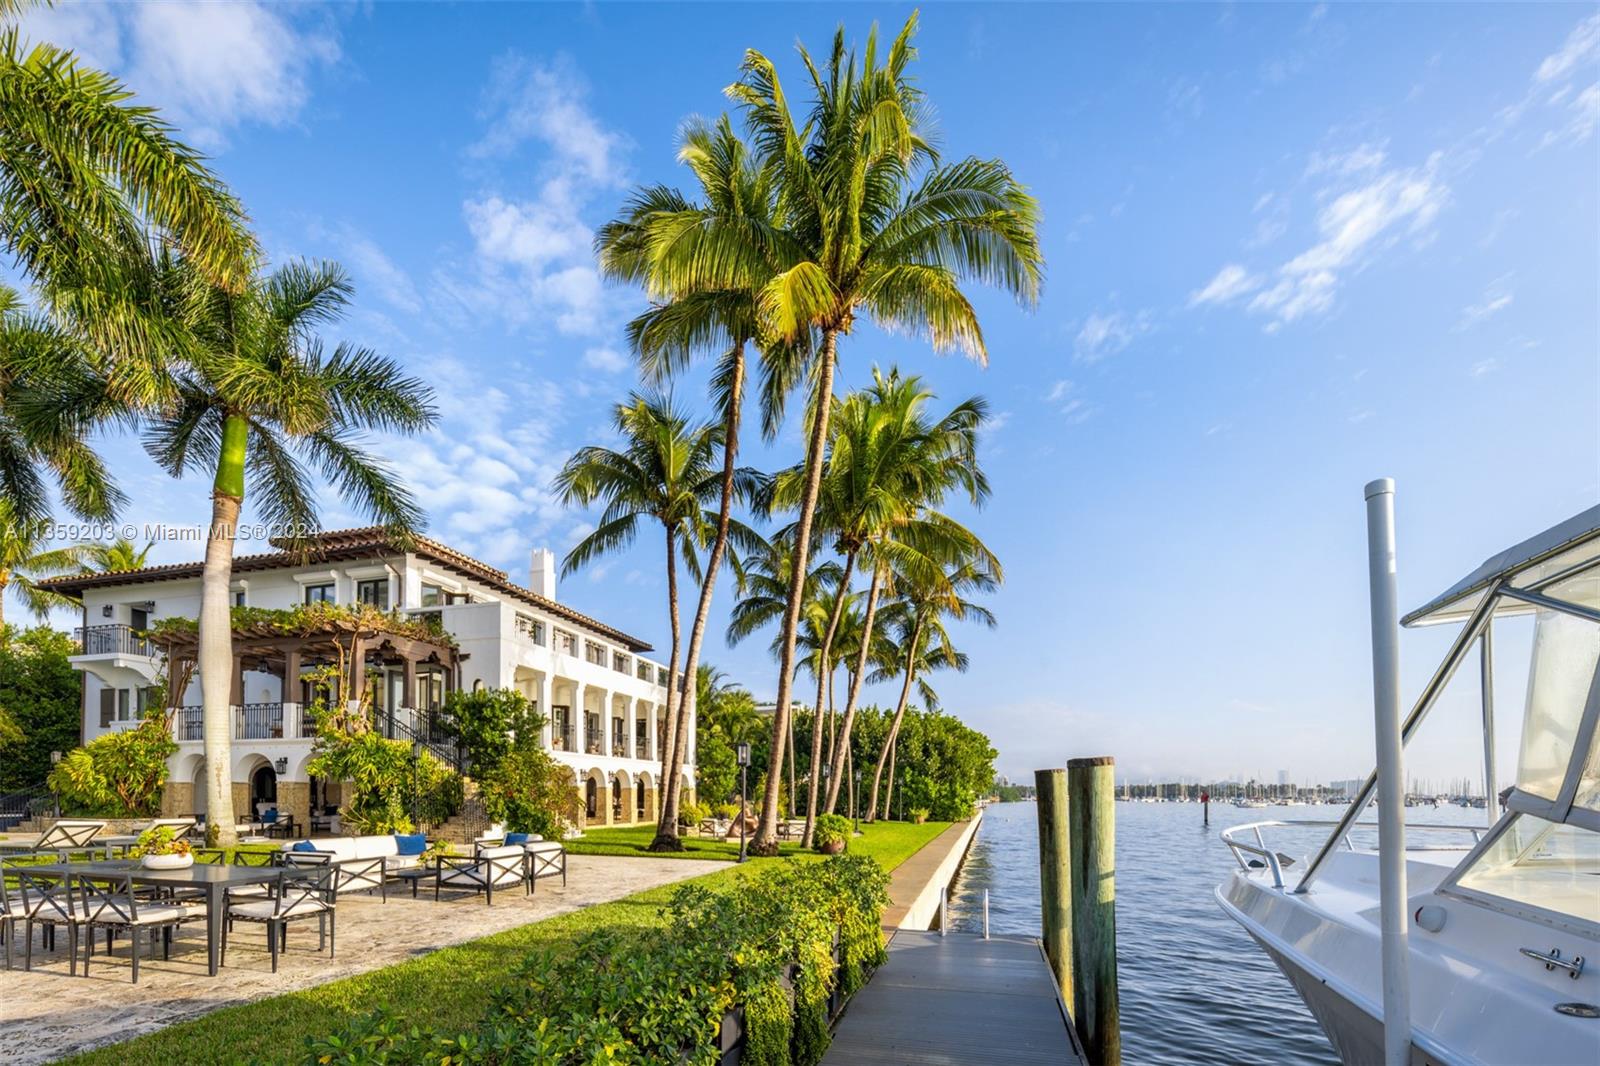 Perfectly set on a ½ acre +, bayfront estate, this 3-story Villa is the epitome of sophisticated Miami living. Step into the atrium boasting 30’ ceilings, Jerusalem stone staircase where you are greeted by unobstructed panoramic water views of the Miami skyline.From the mahogany floors to the 40’ dock, every attention to detail is reflected in this estate’s craftsmanship. Enjoy views of Biscayne Bay from the grand room or the open terrace, ideal for outdoor entertaining while overlooking the pool & 300’ of open bay. 8 beds & 8/1 baths are perfectly spread out over 10,100 sf of area. Located in private, guard-gated & historic community of Camp Biscayne, enjoy tranquility in this estate while being steps away from some of the country’s finest private schools, shops, restaurants, & marinas.